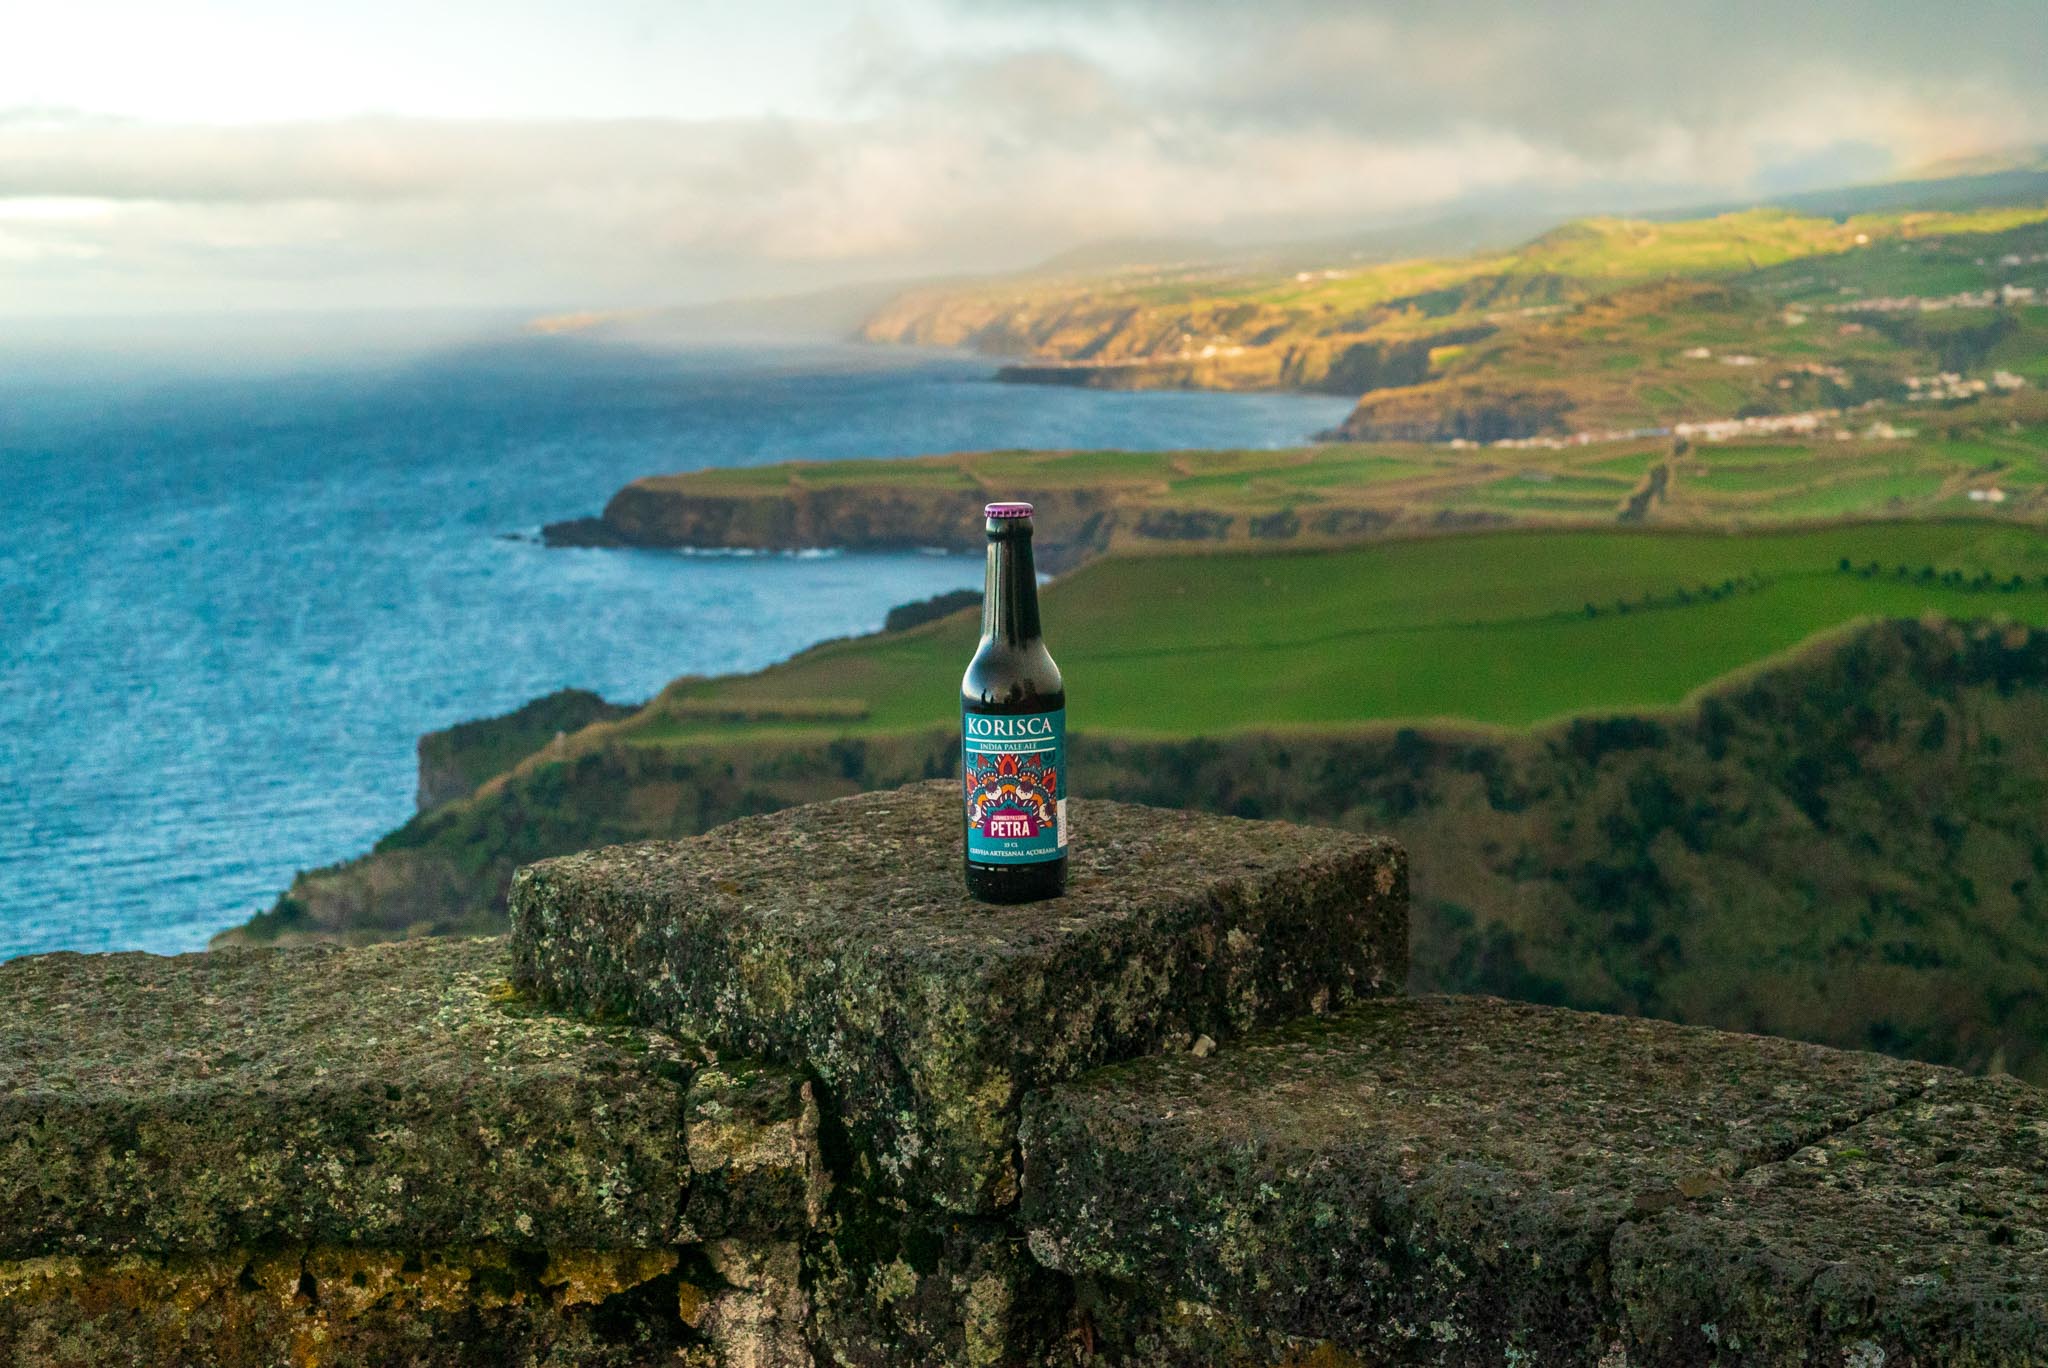 Azorean craft beer Korisca Petra (IPA), on top of a stone wall with the blue sea, green landscape and coast of the island of São Miguel in the background, at the Miradouro de Santa Iria, Ribeira Grande, São Miguel, Azores.